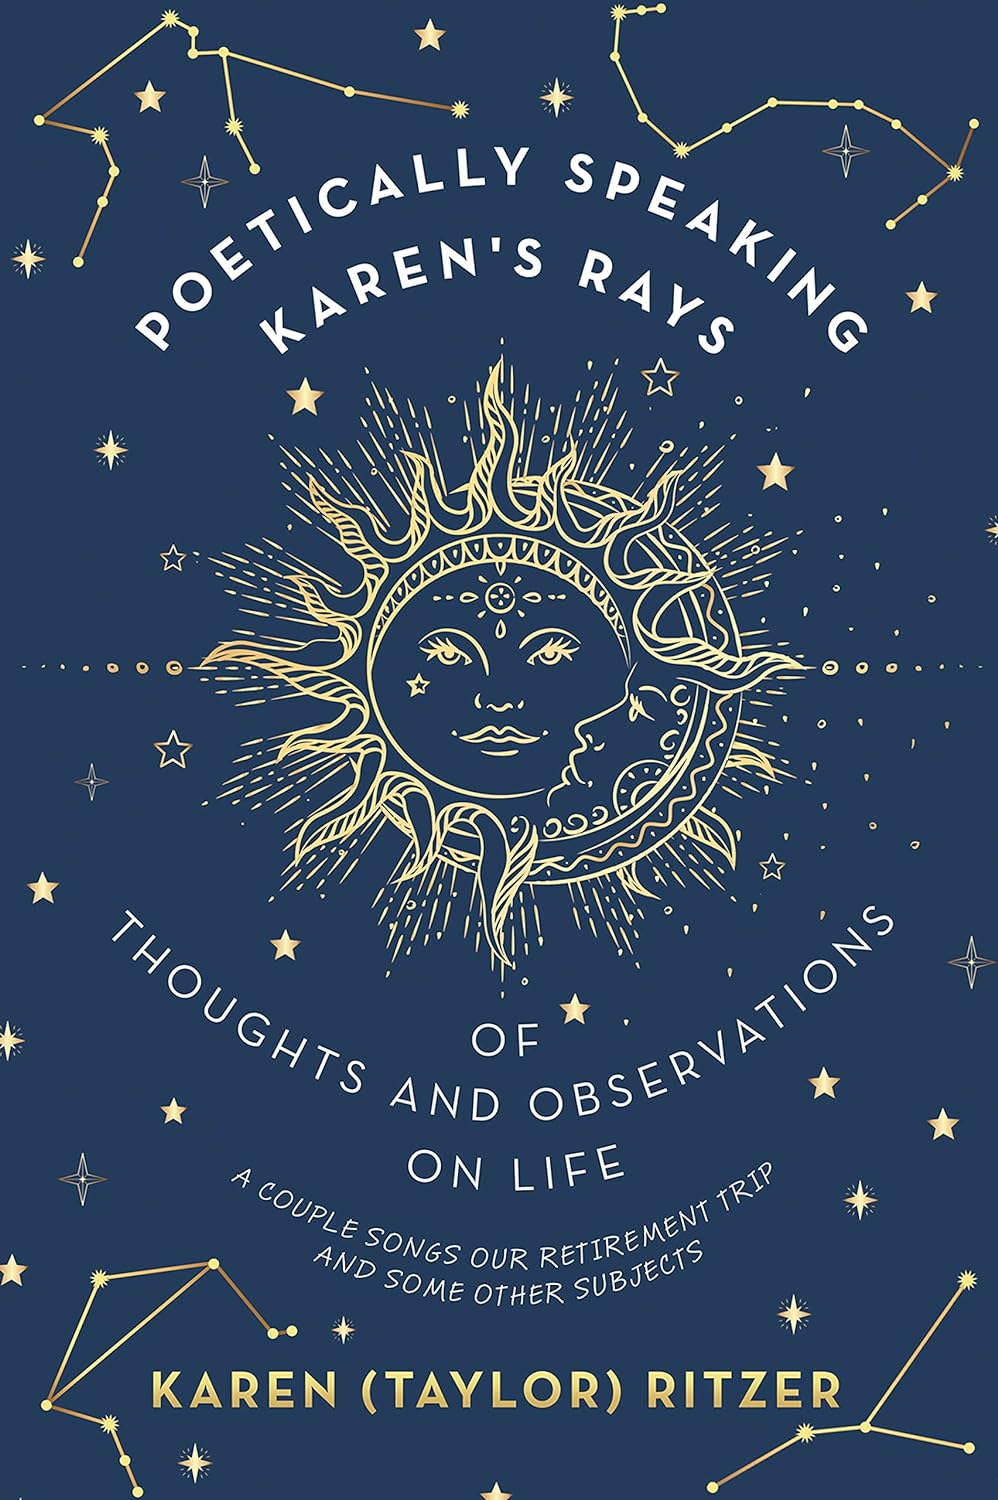 Karen Taylor Ritzer Unveils Heartfelt Collection in "Poetically Speaking: Karen’s Rays of Thoughts and Observations on Life"